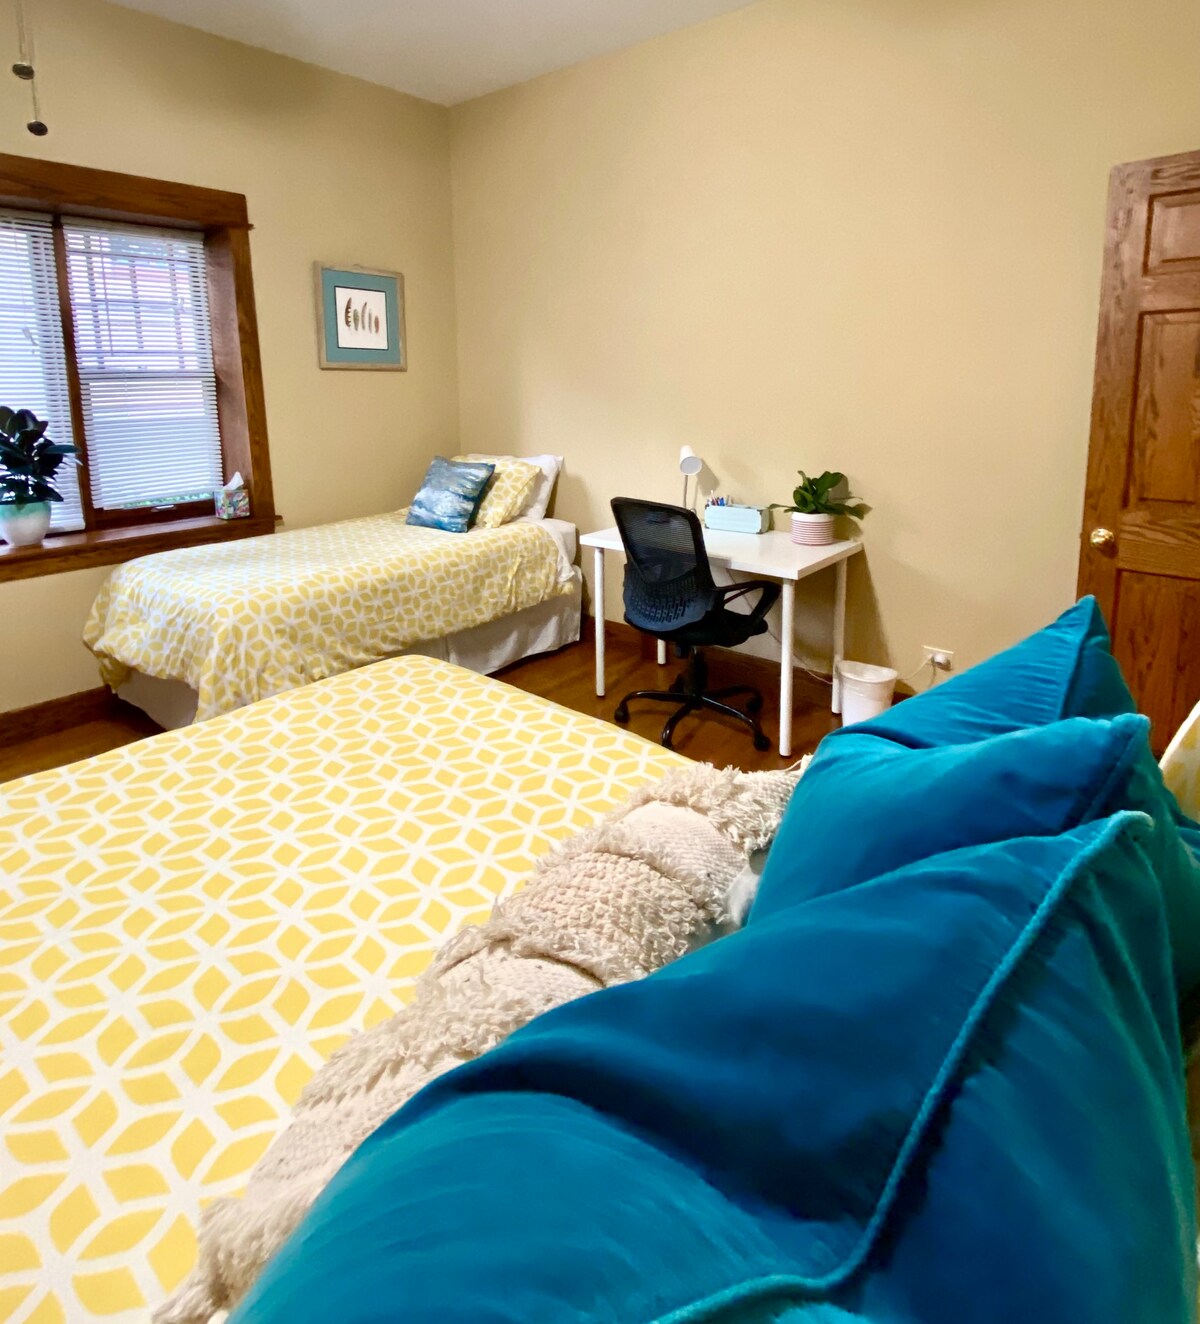 Two-apartment rental for big groups or families